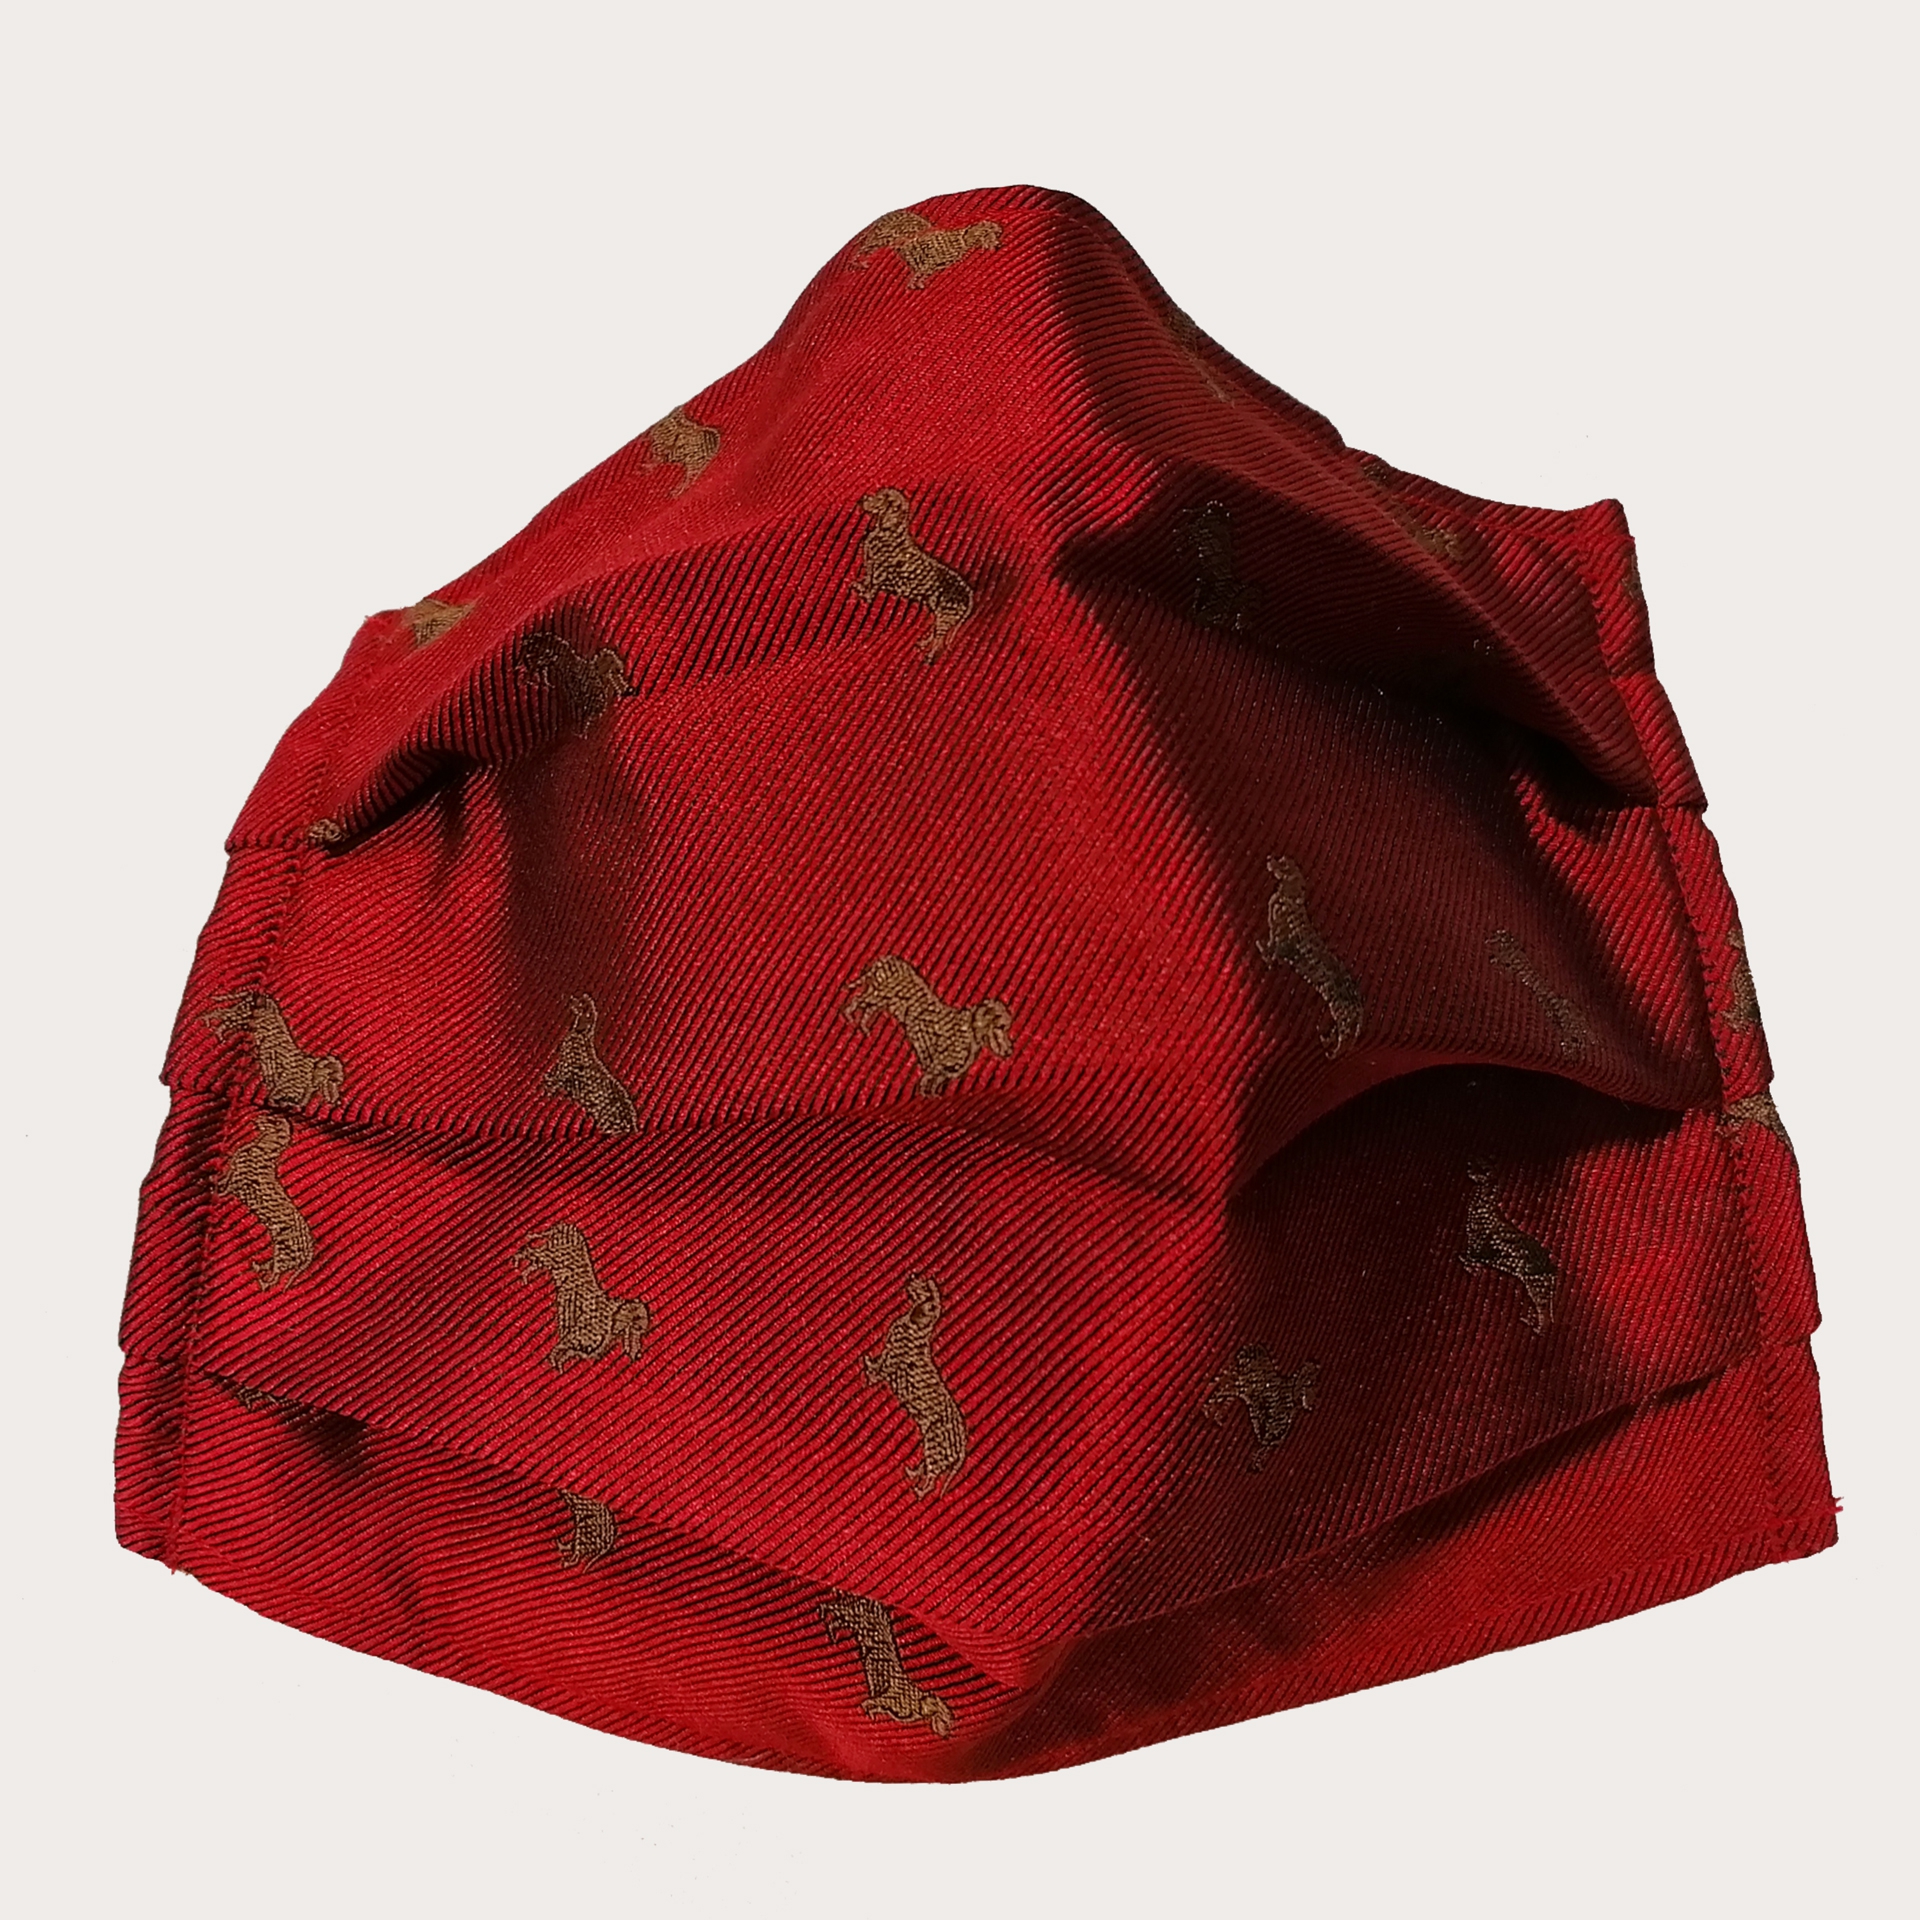 StyleMask Silk filter face mask, red dachshunds pattern